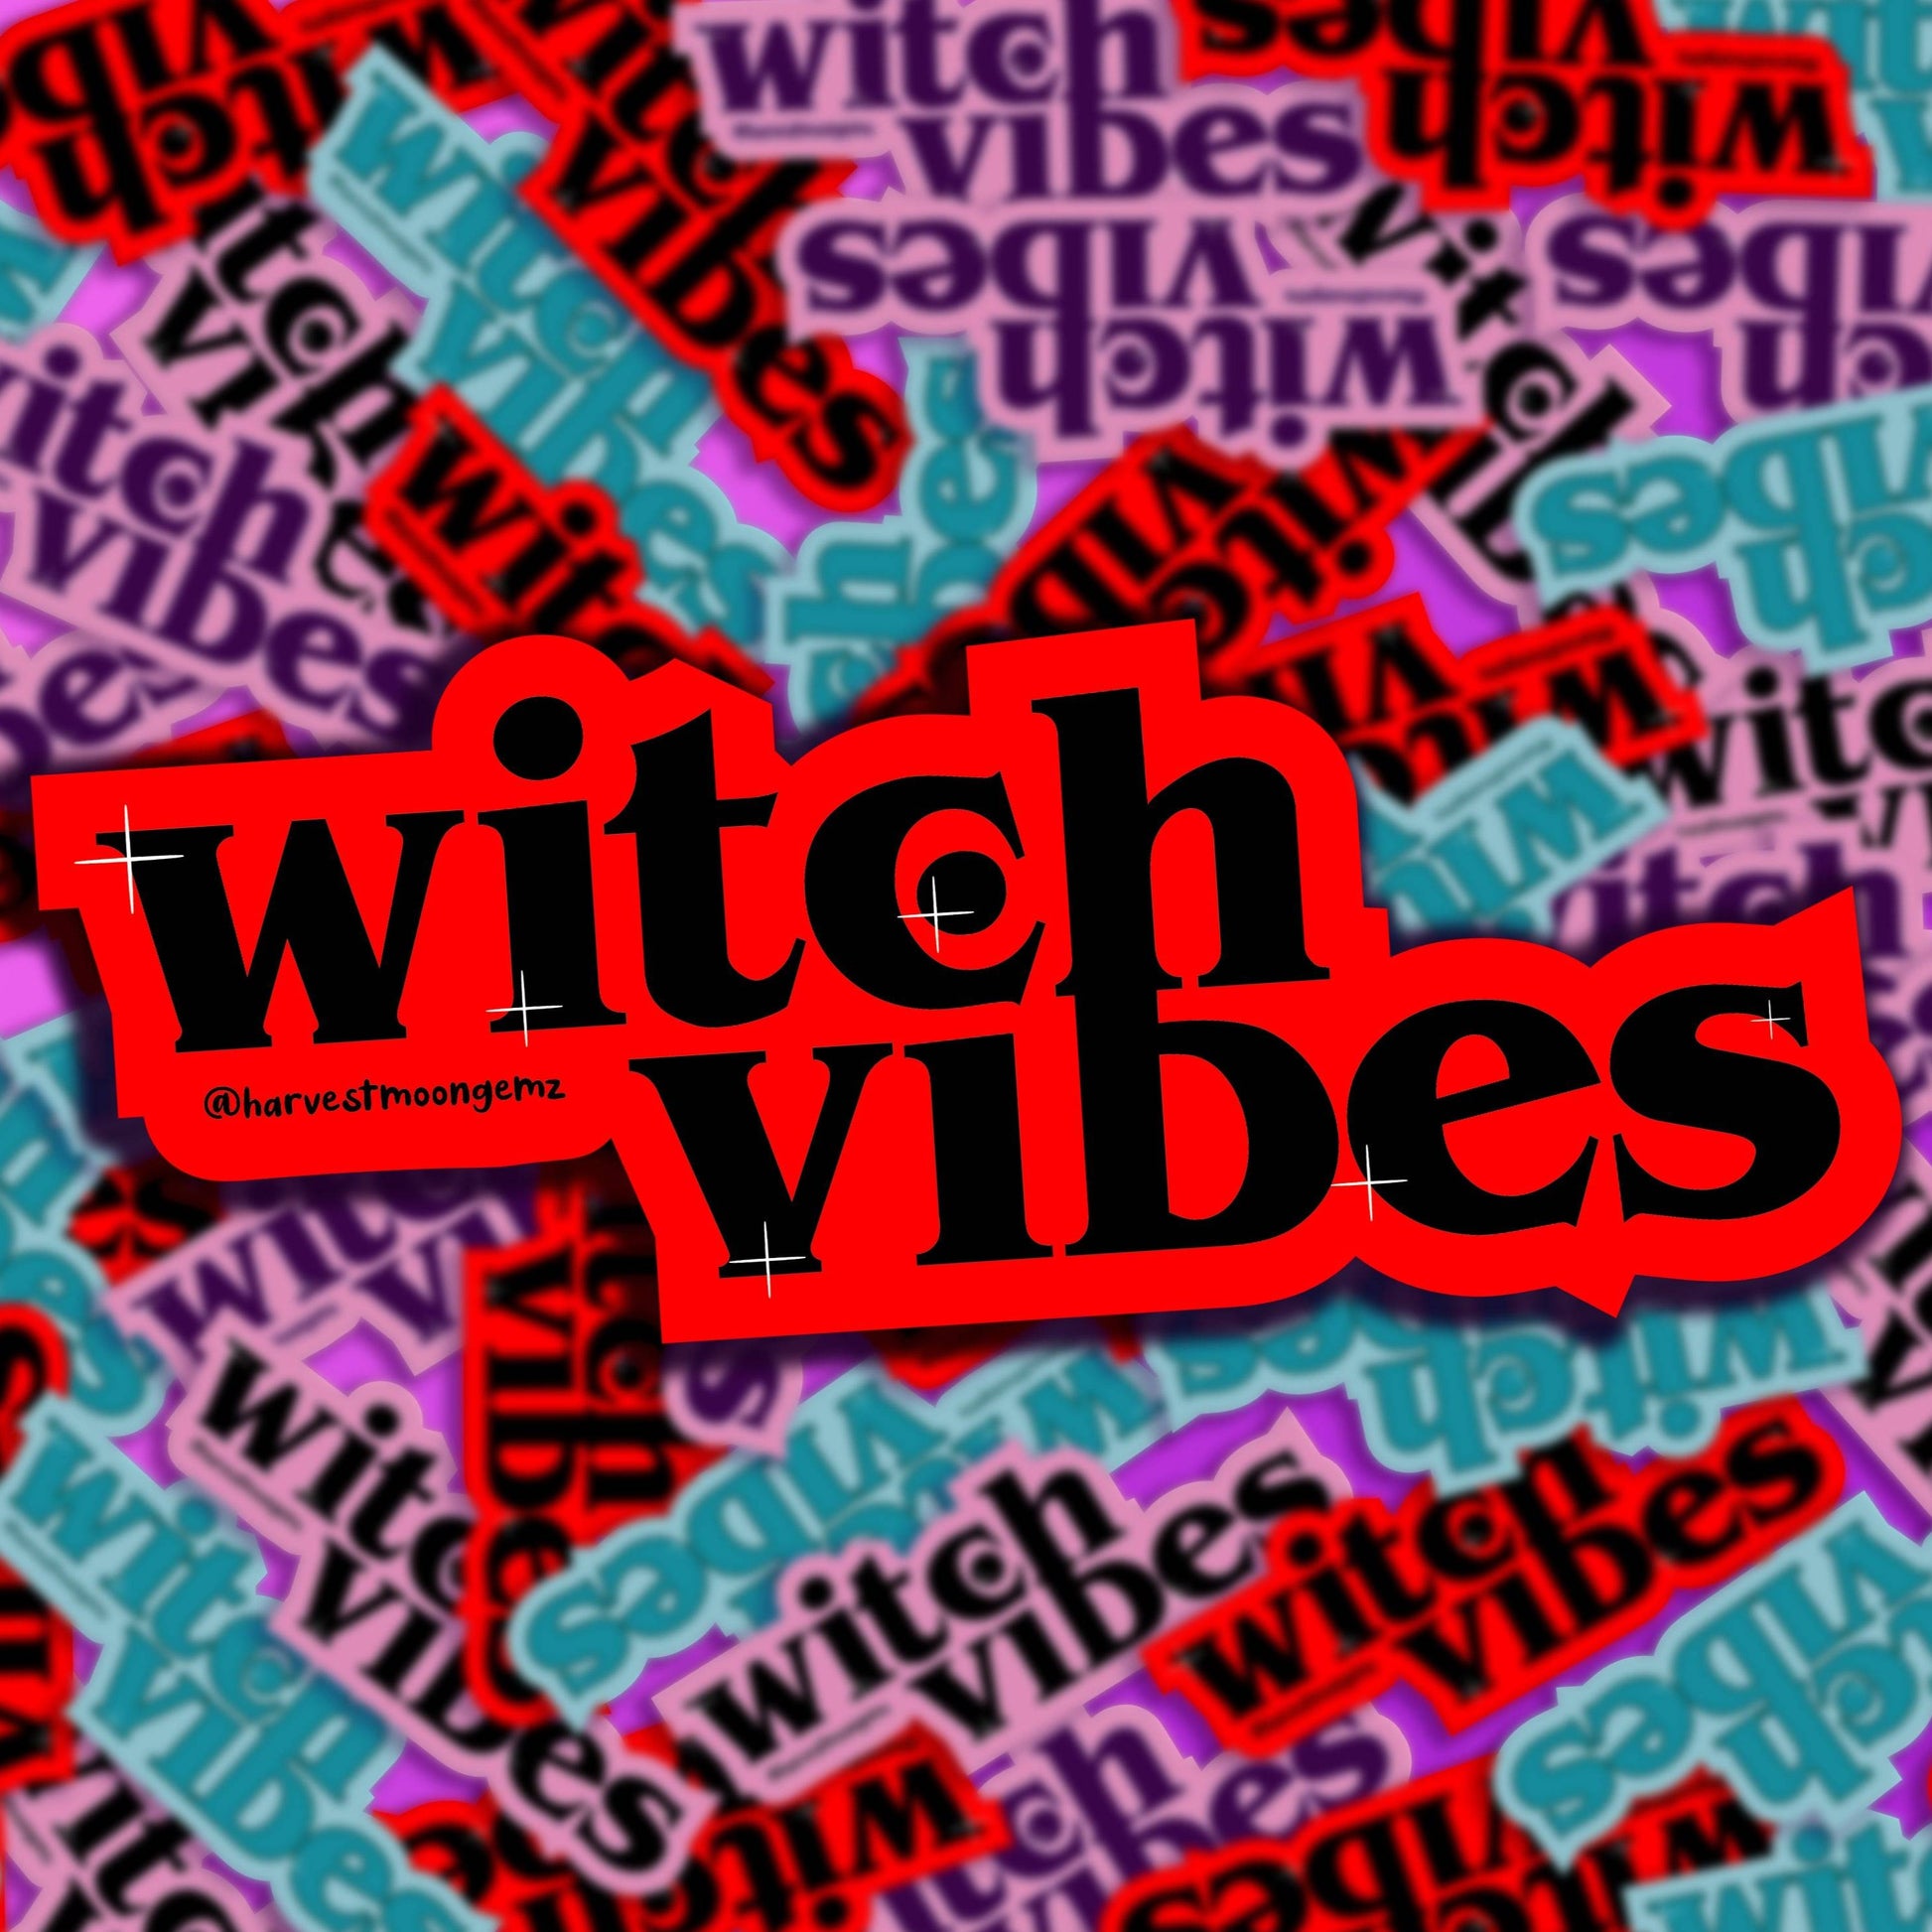 Witch Vibes Stickers Harvest Moon Gemz